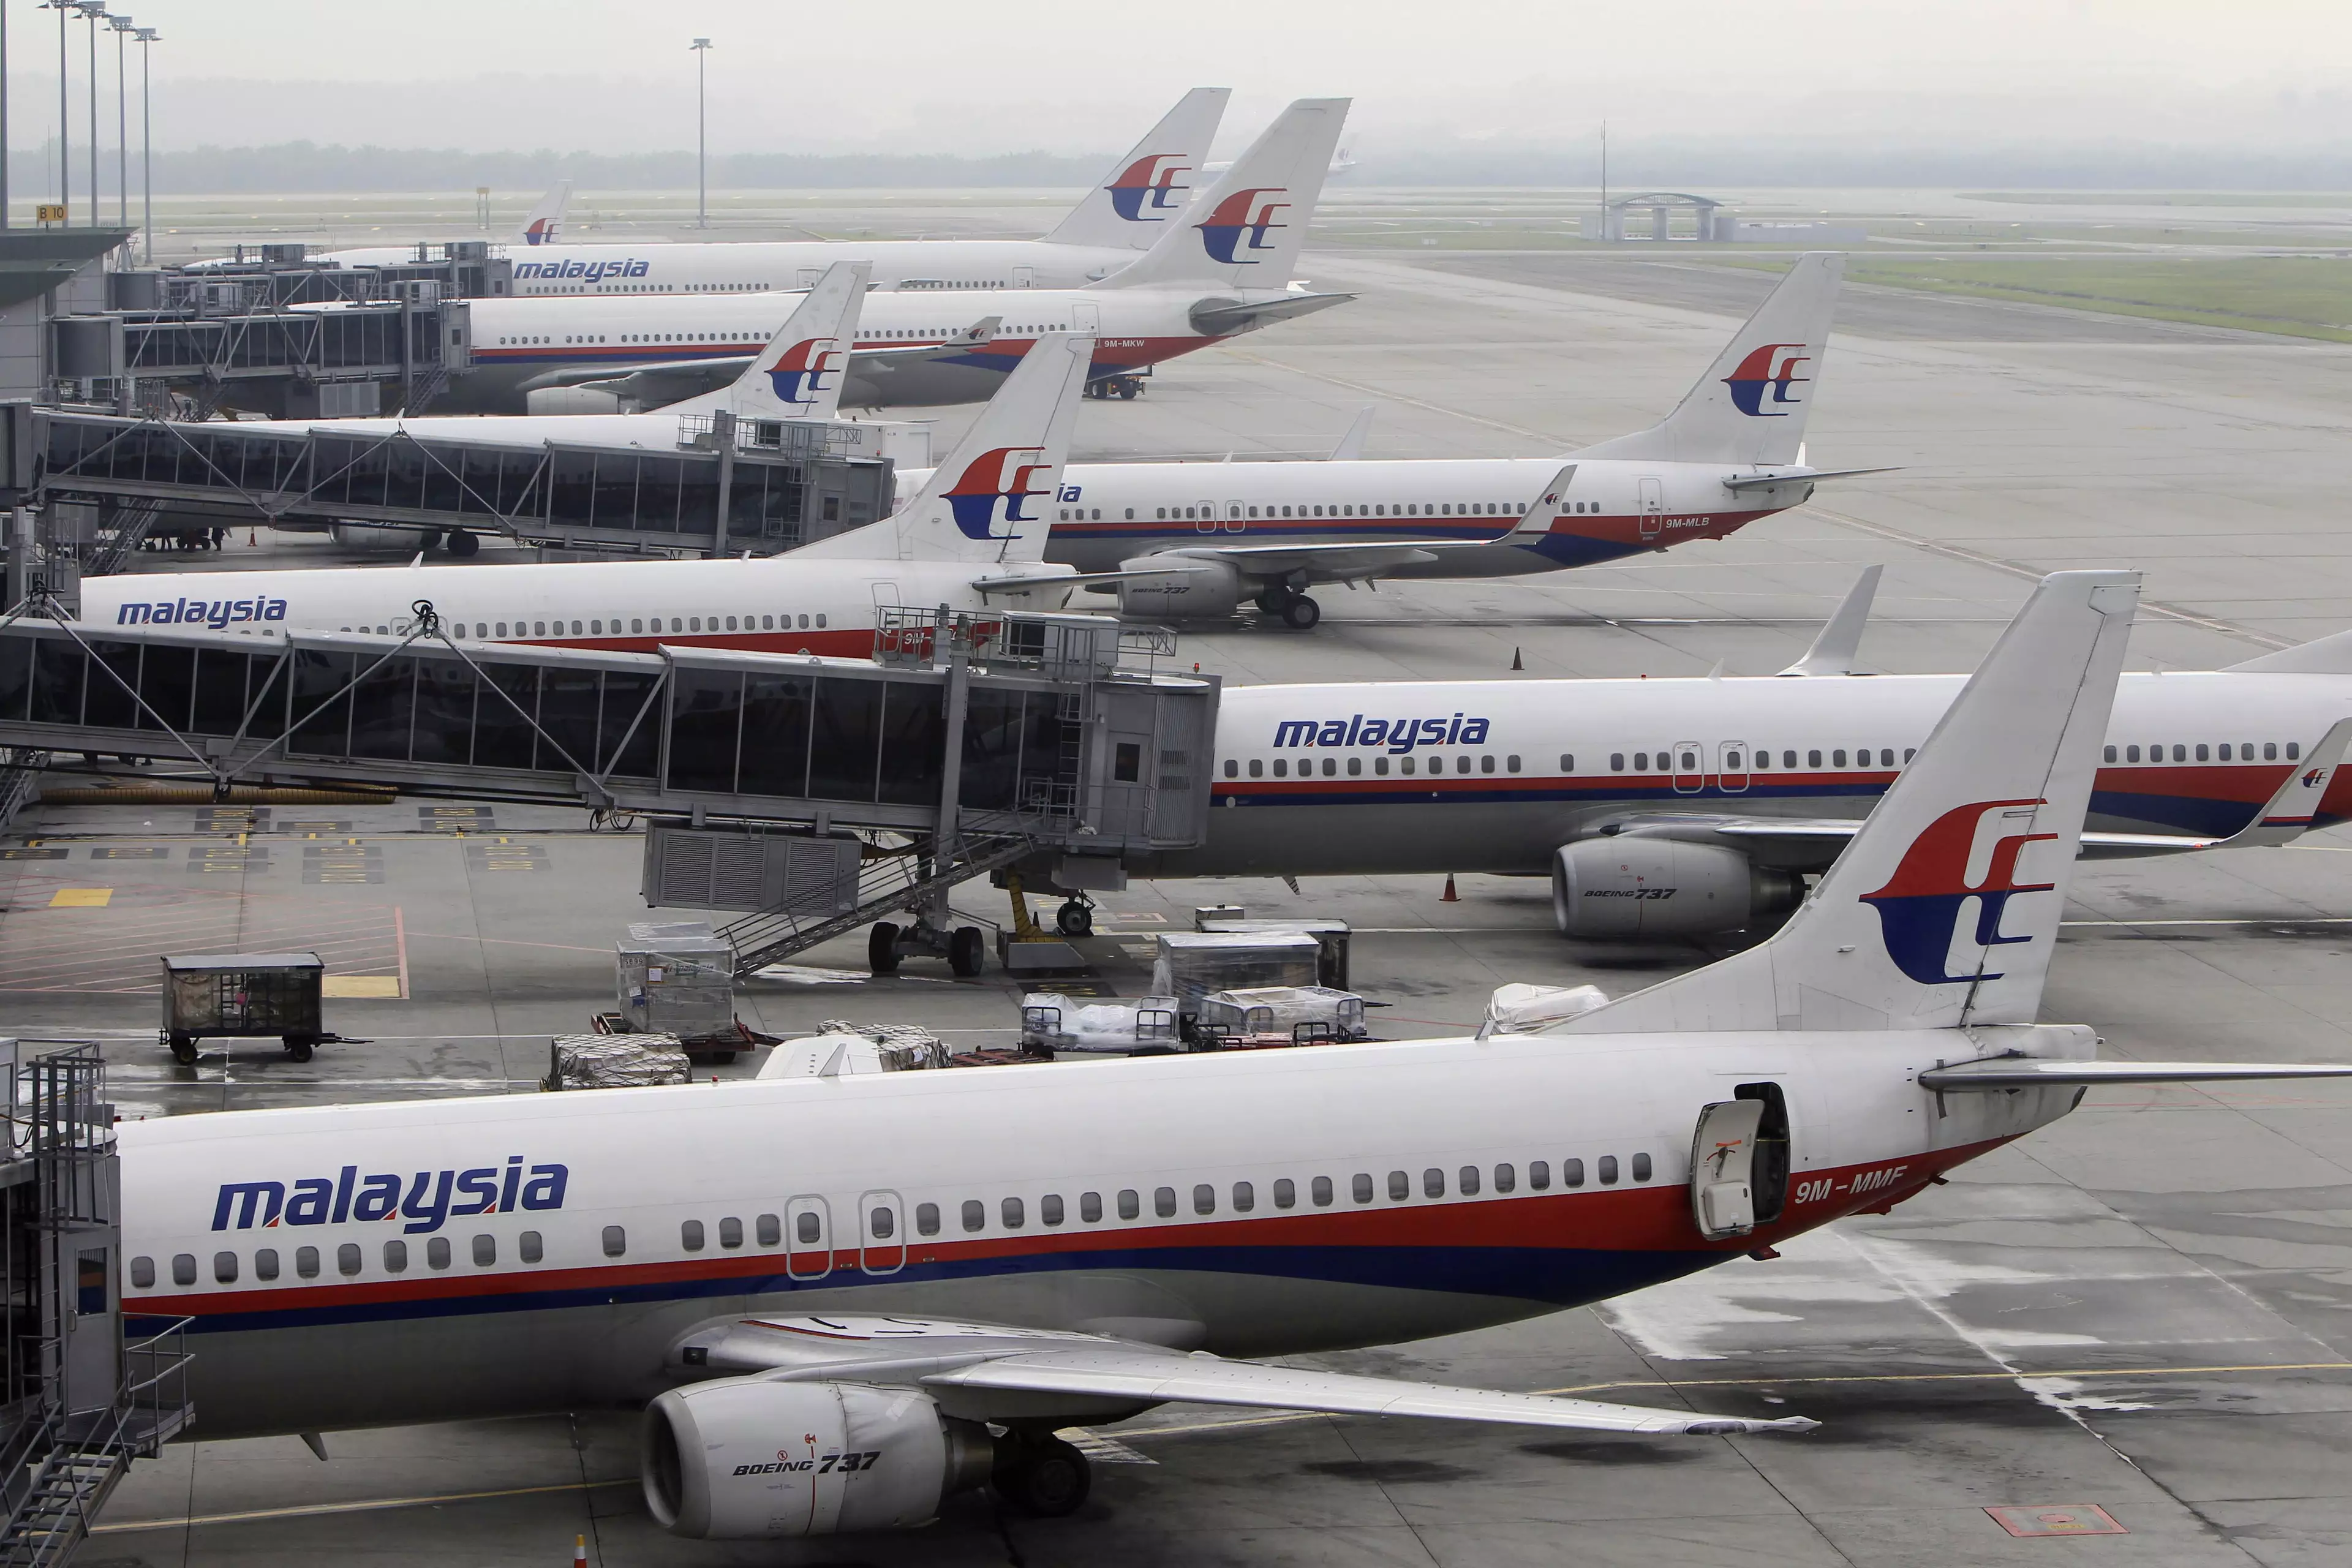 Details Emerge Suggesting That Flight MH370 Should Not Have Flown